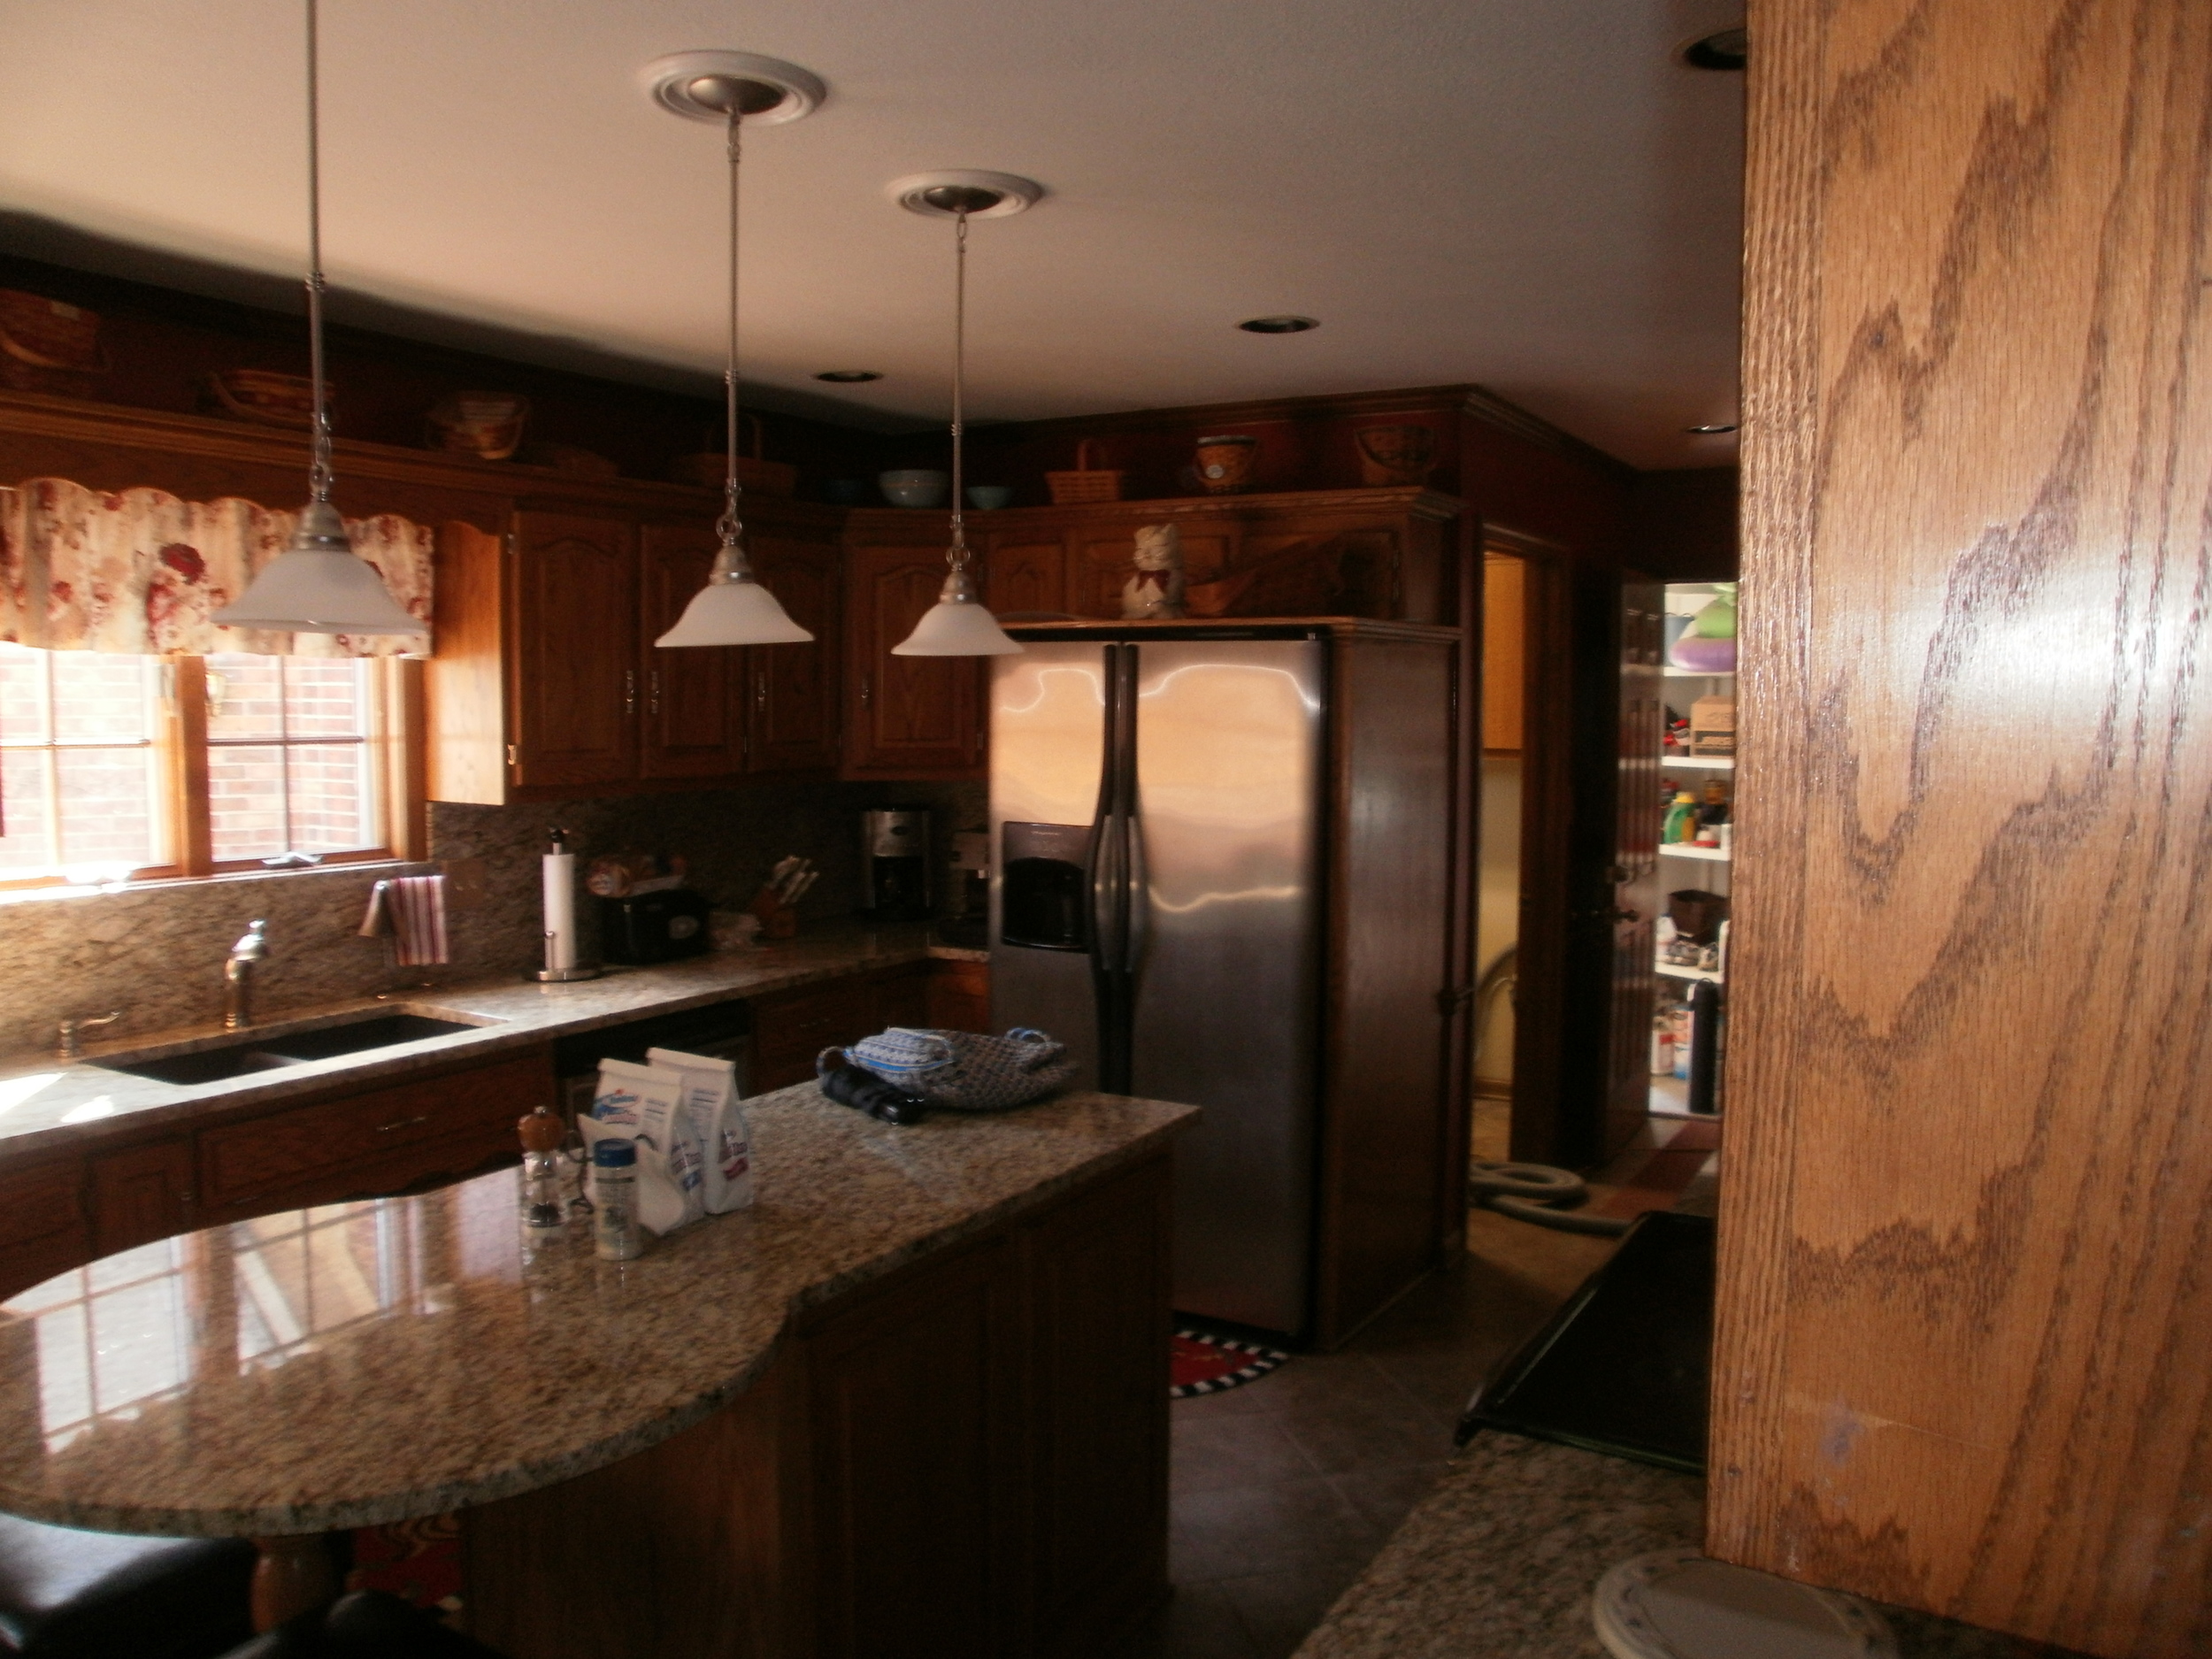 Miles-remodel-kitchen-builders-Indianapolis-indiana.JPG